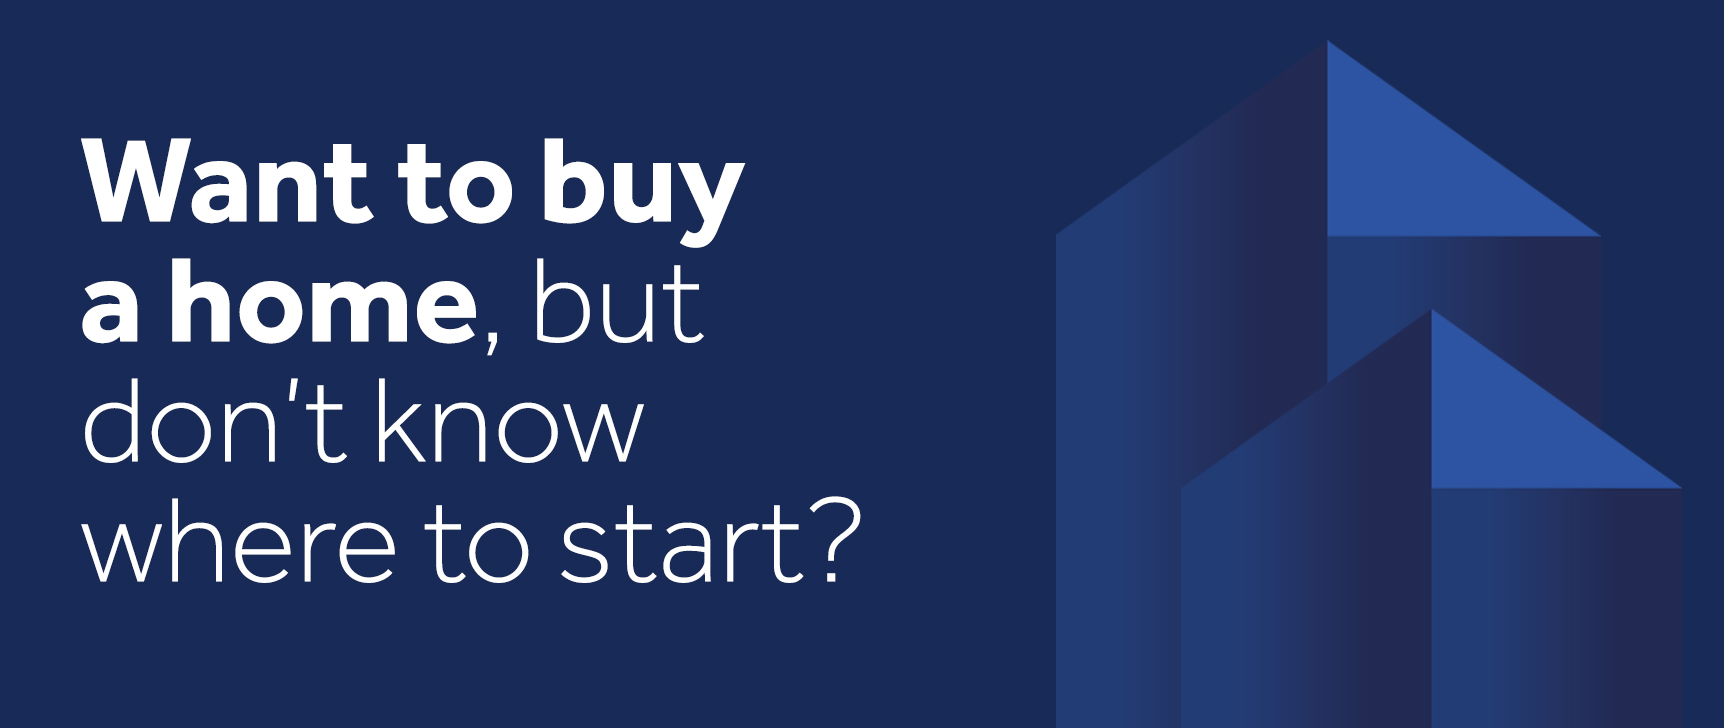 Want to buy a home, but don't know where to start? 